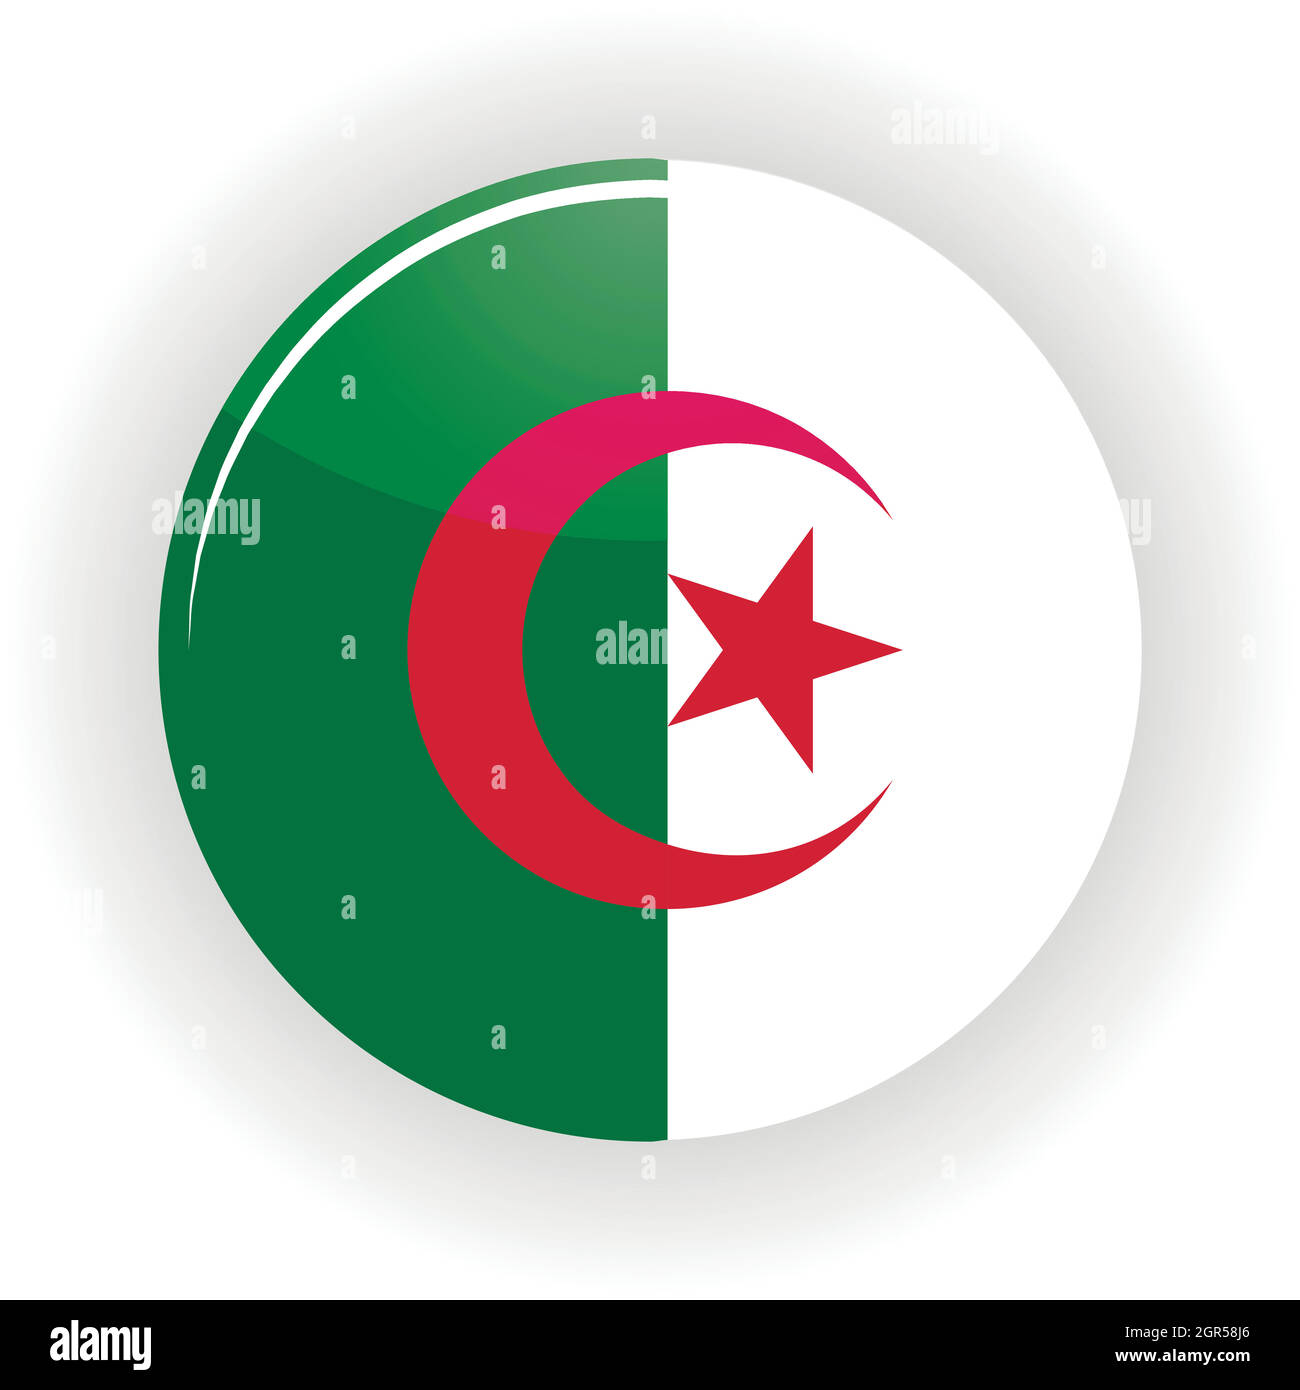 Circle algeria Cut Out Stock Images & Pictures - Alamy